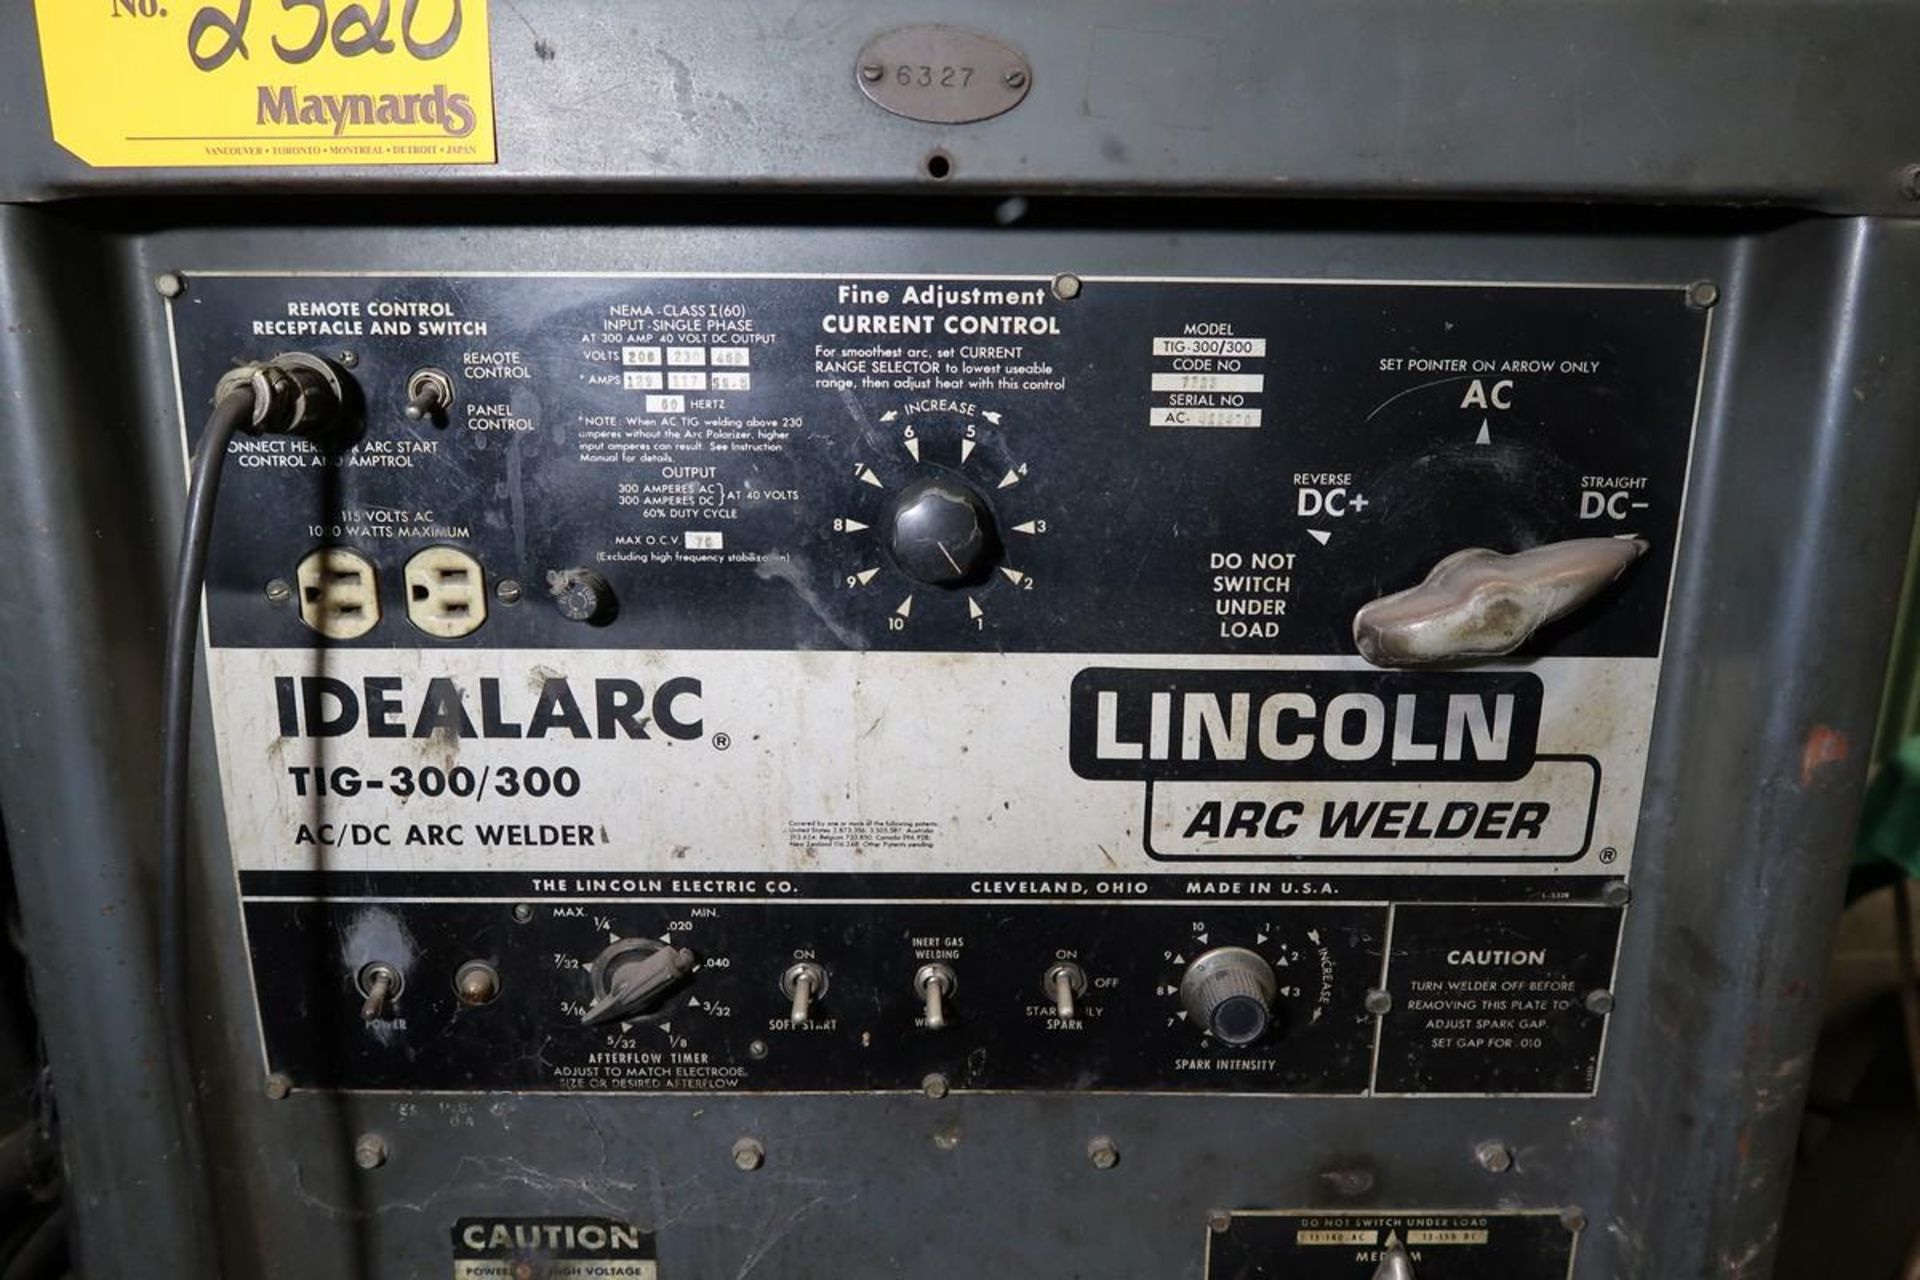 Lincoln Electric Idealarc TIG-300/300 300A AC/DC Arc Welding Power Source - Image 4 of 7